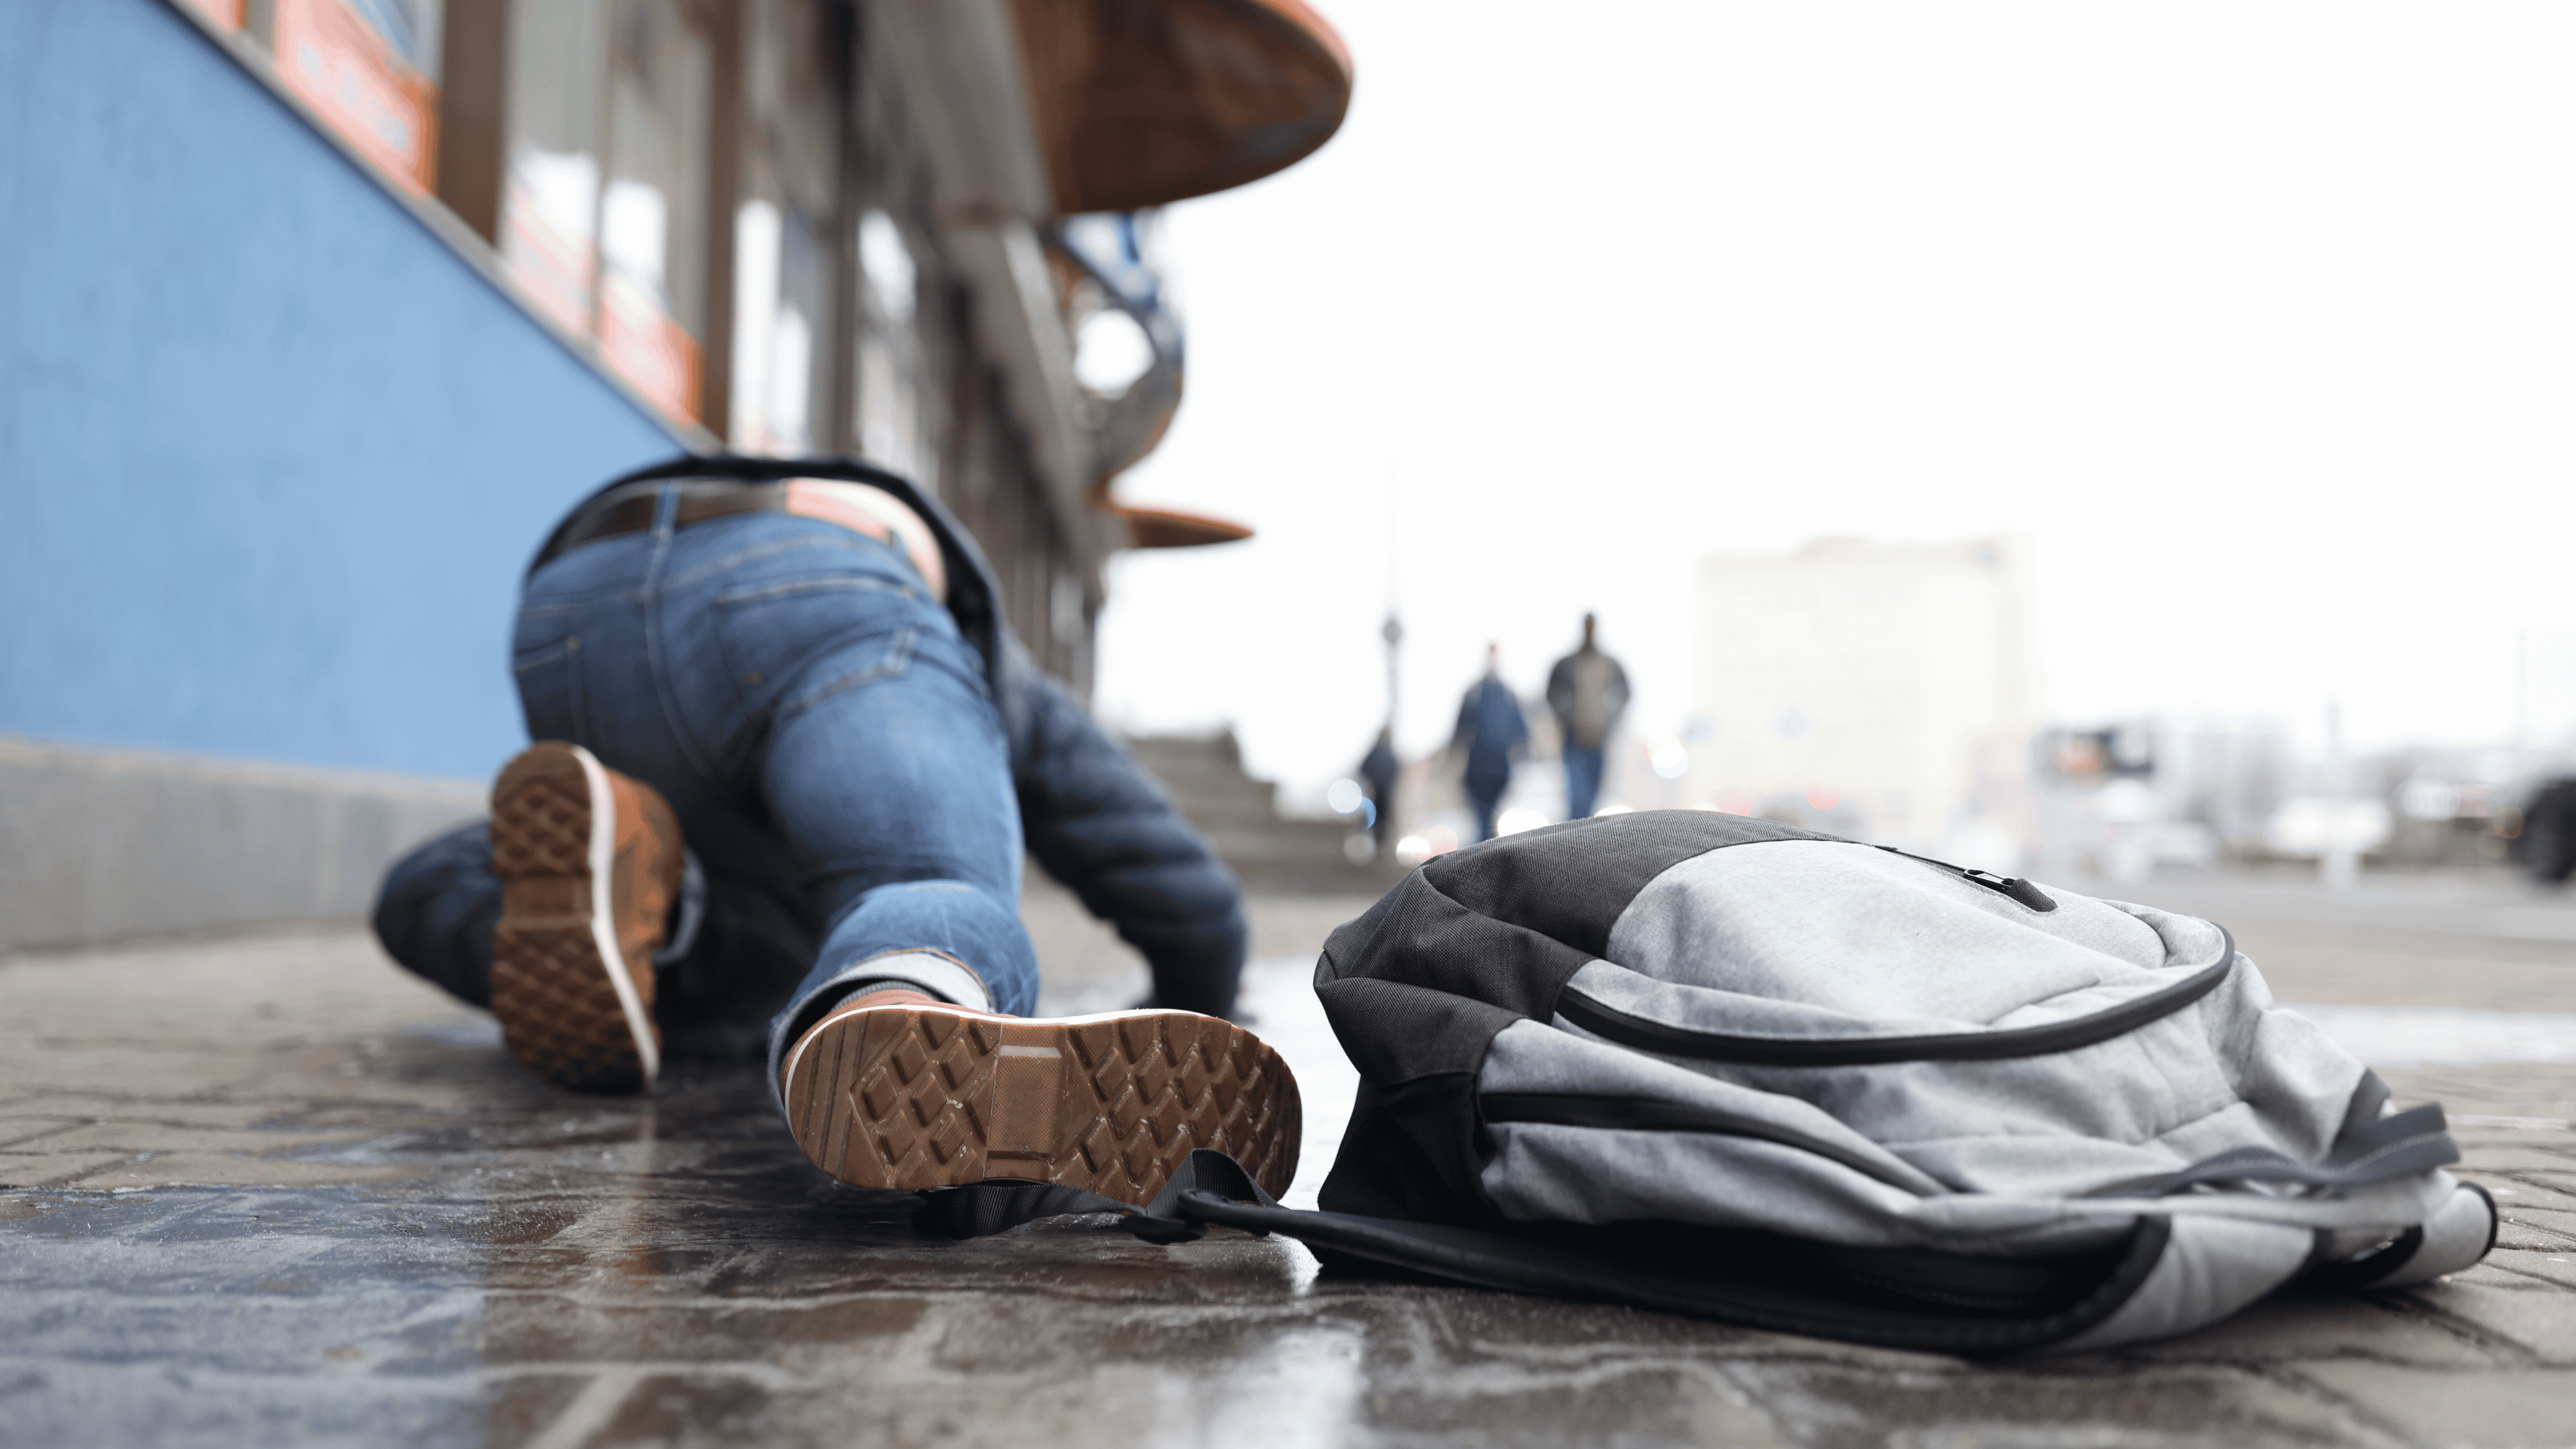 Image of a person who tripped on a city sidewalk, landing on hands and knees and dropping their backpack.